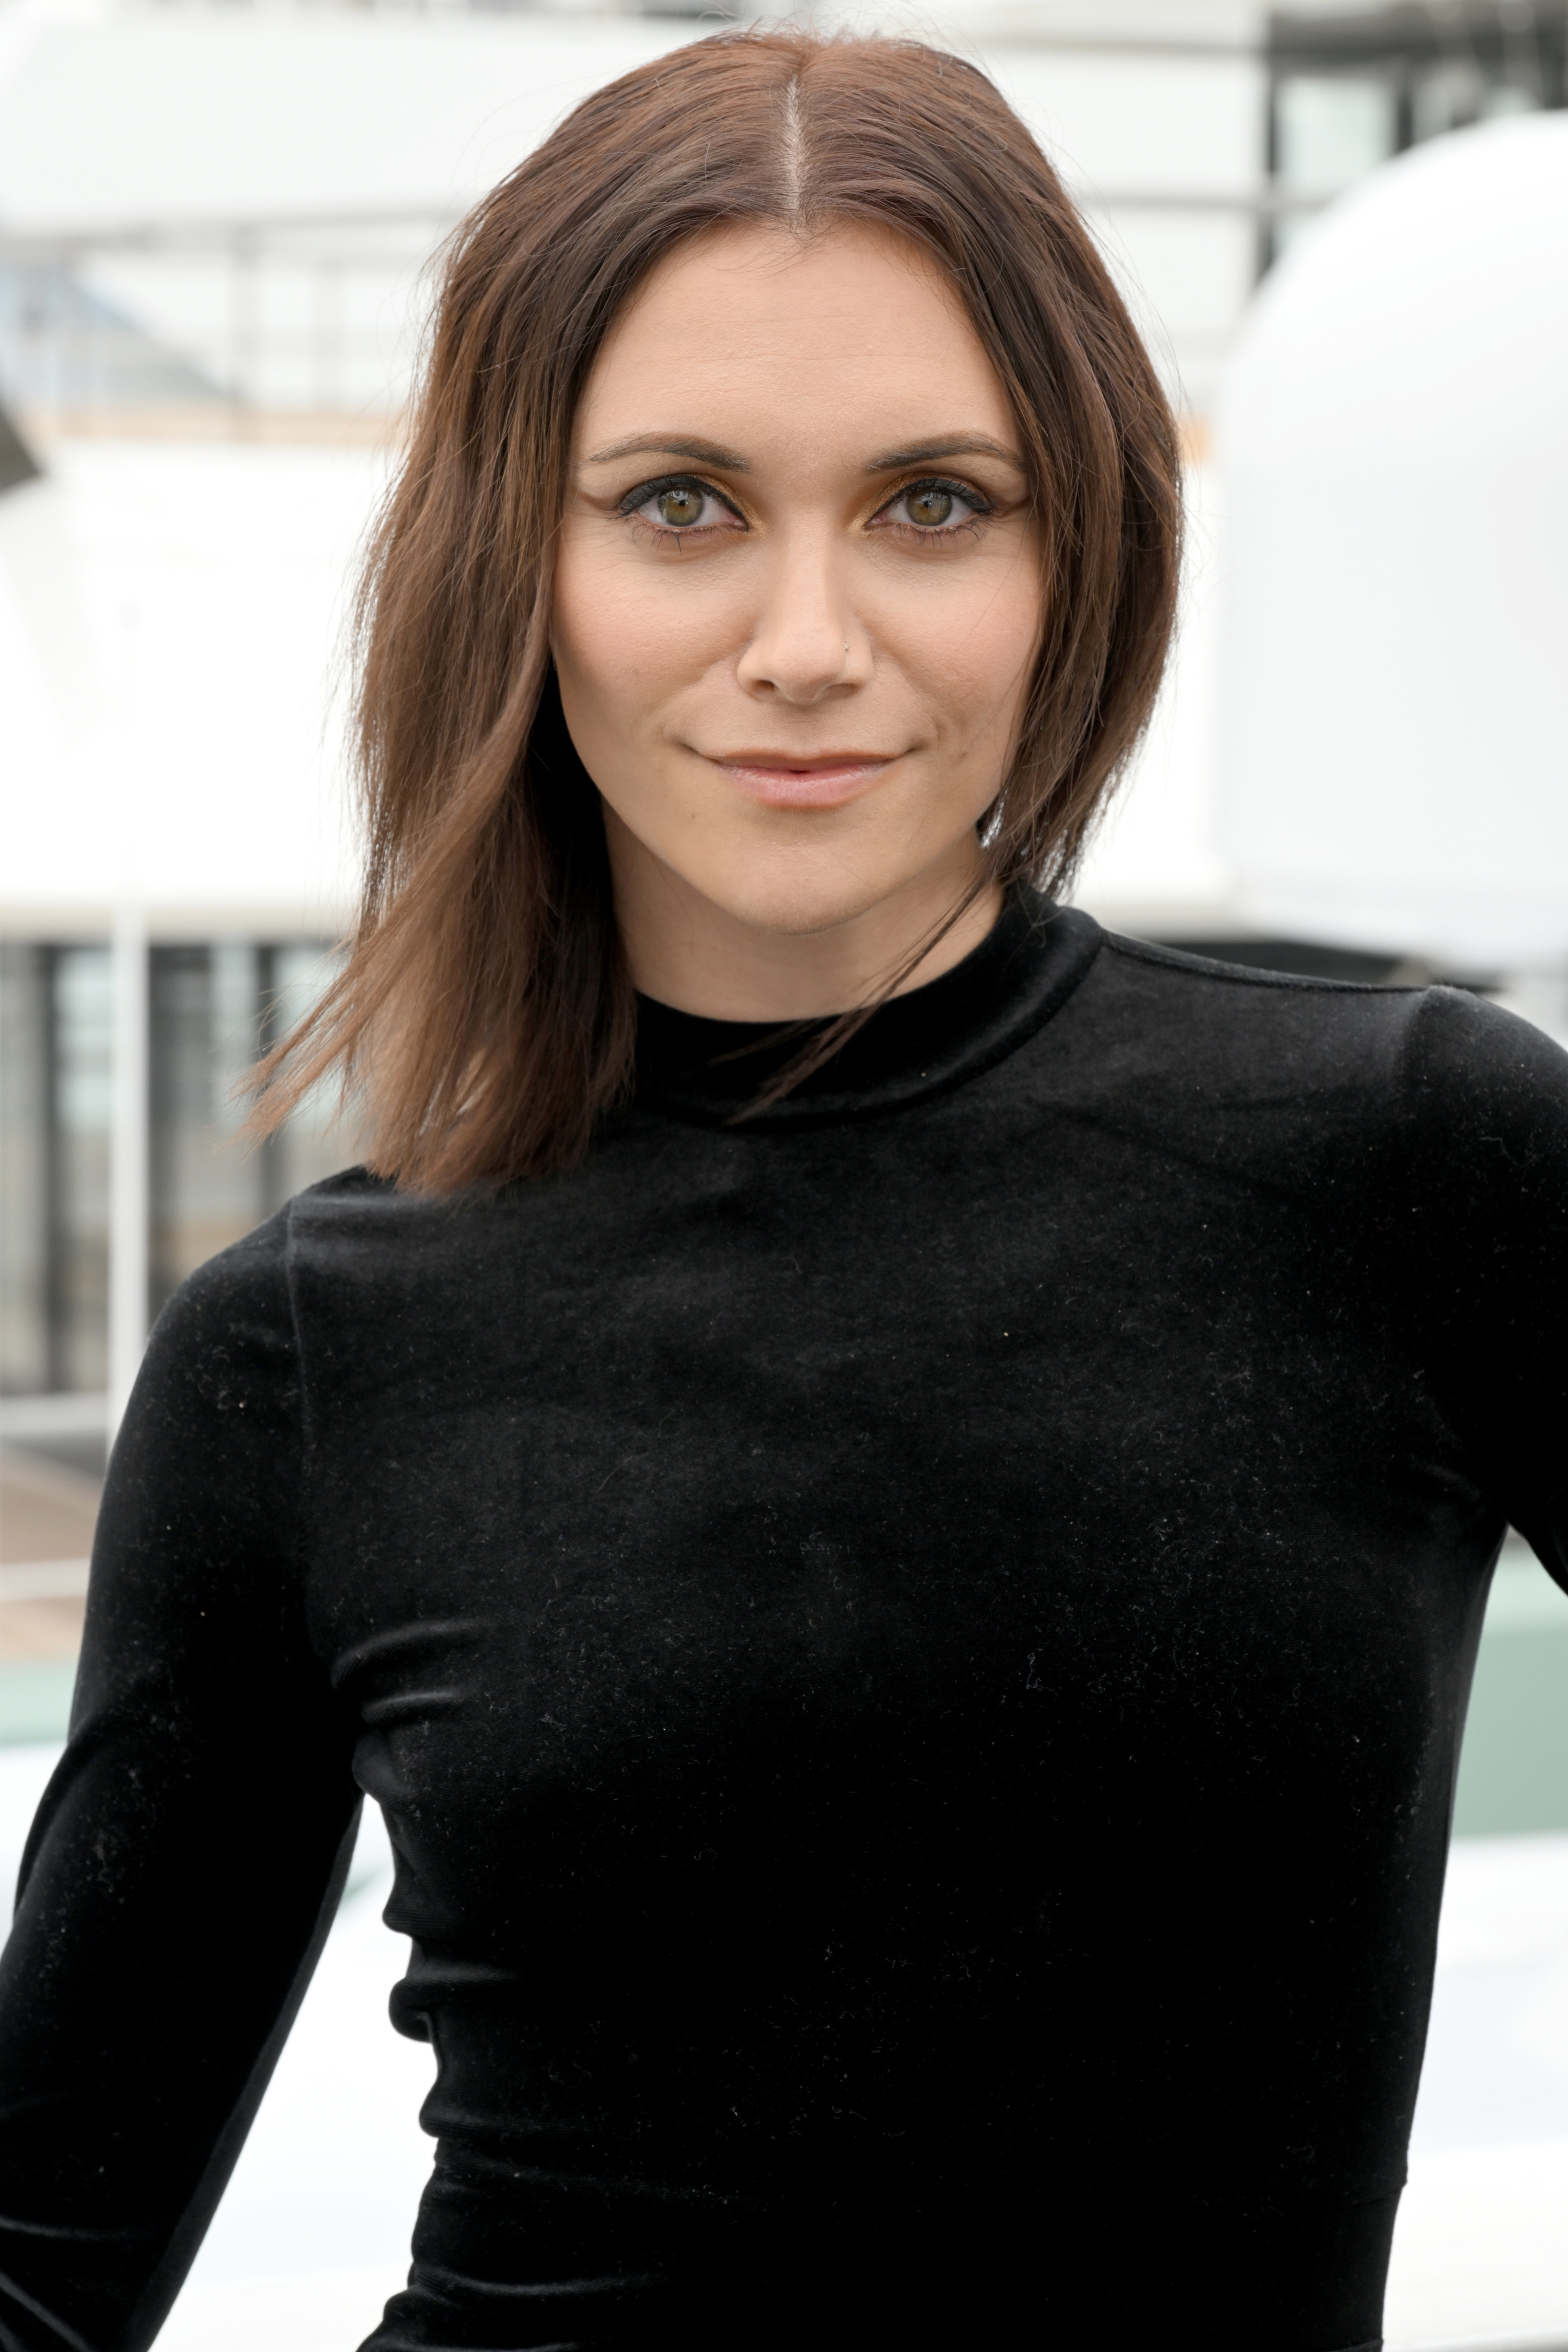 Alyson Stoner stops by San Diego Comic-Con 2022 on July 23, 2022